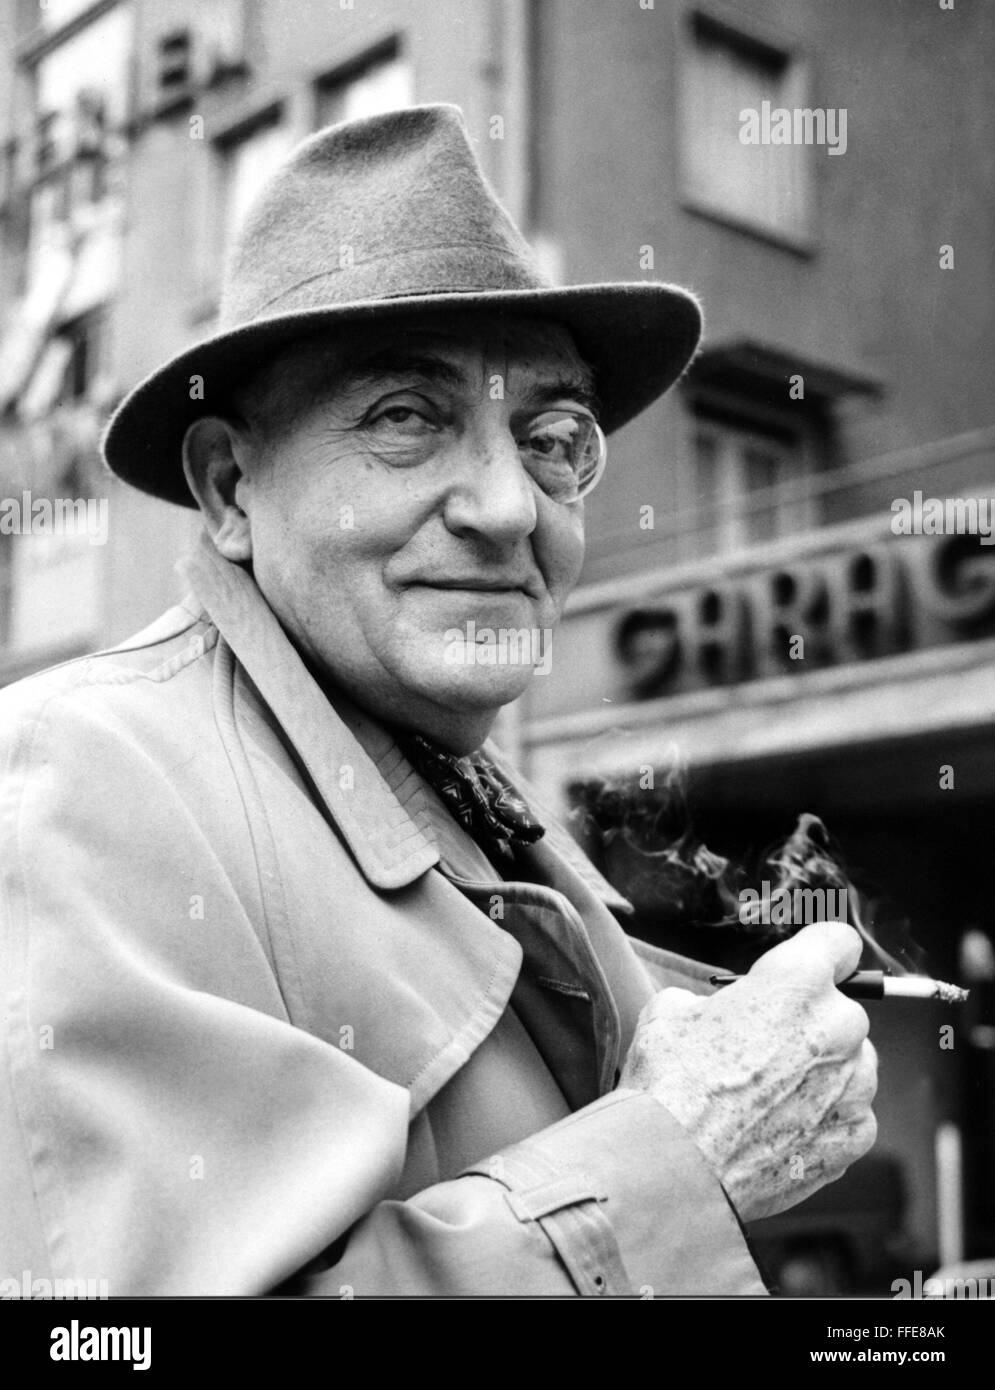 FILE - An undated file picture made available on 12 February 2016 shows Austrian American director, writer and film producer Fritz Lang. A digitally remastered version of Fritz Lang's classic movie 'Destiny' from 1921 will premiere during the 2016 Berlin International Film Festival, also known as Berlinale. Photo: HEINZ-JUERGEN GOETTERT/dpa (ATTENTION EDITORS: ONLY AVAILABLE IN B/W) Stock Photo